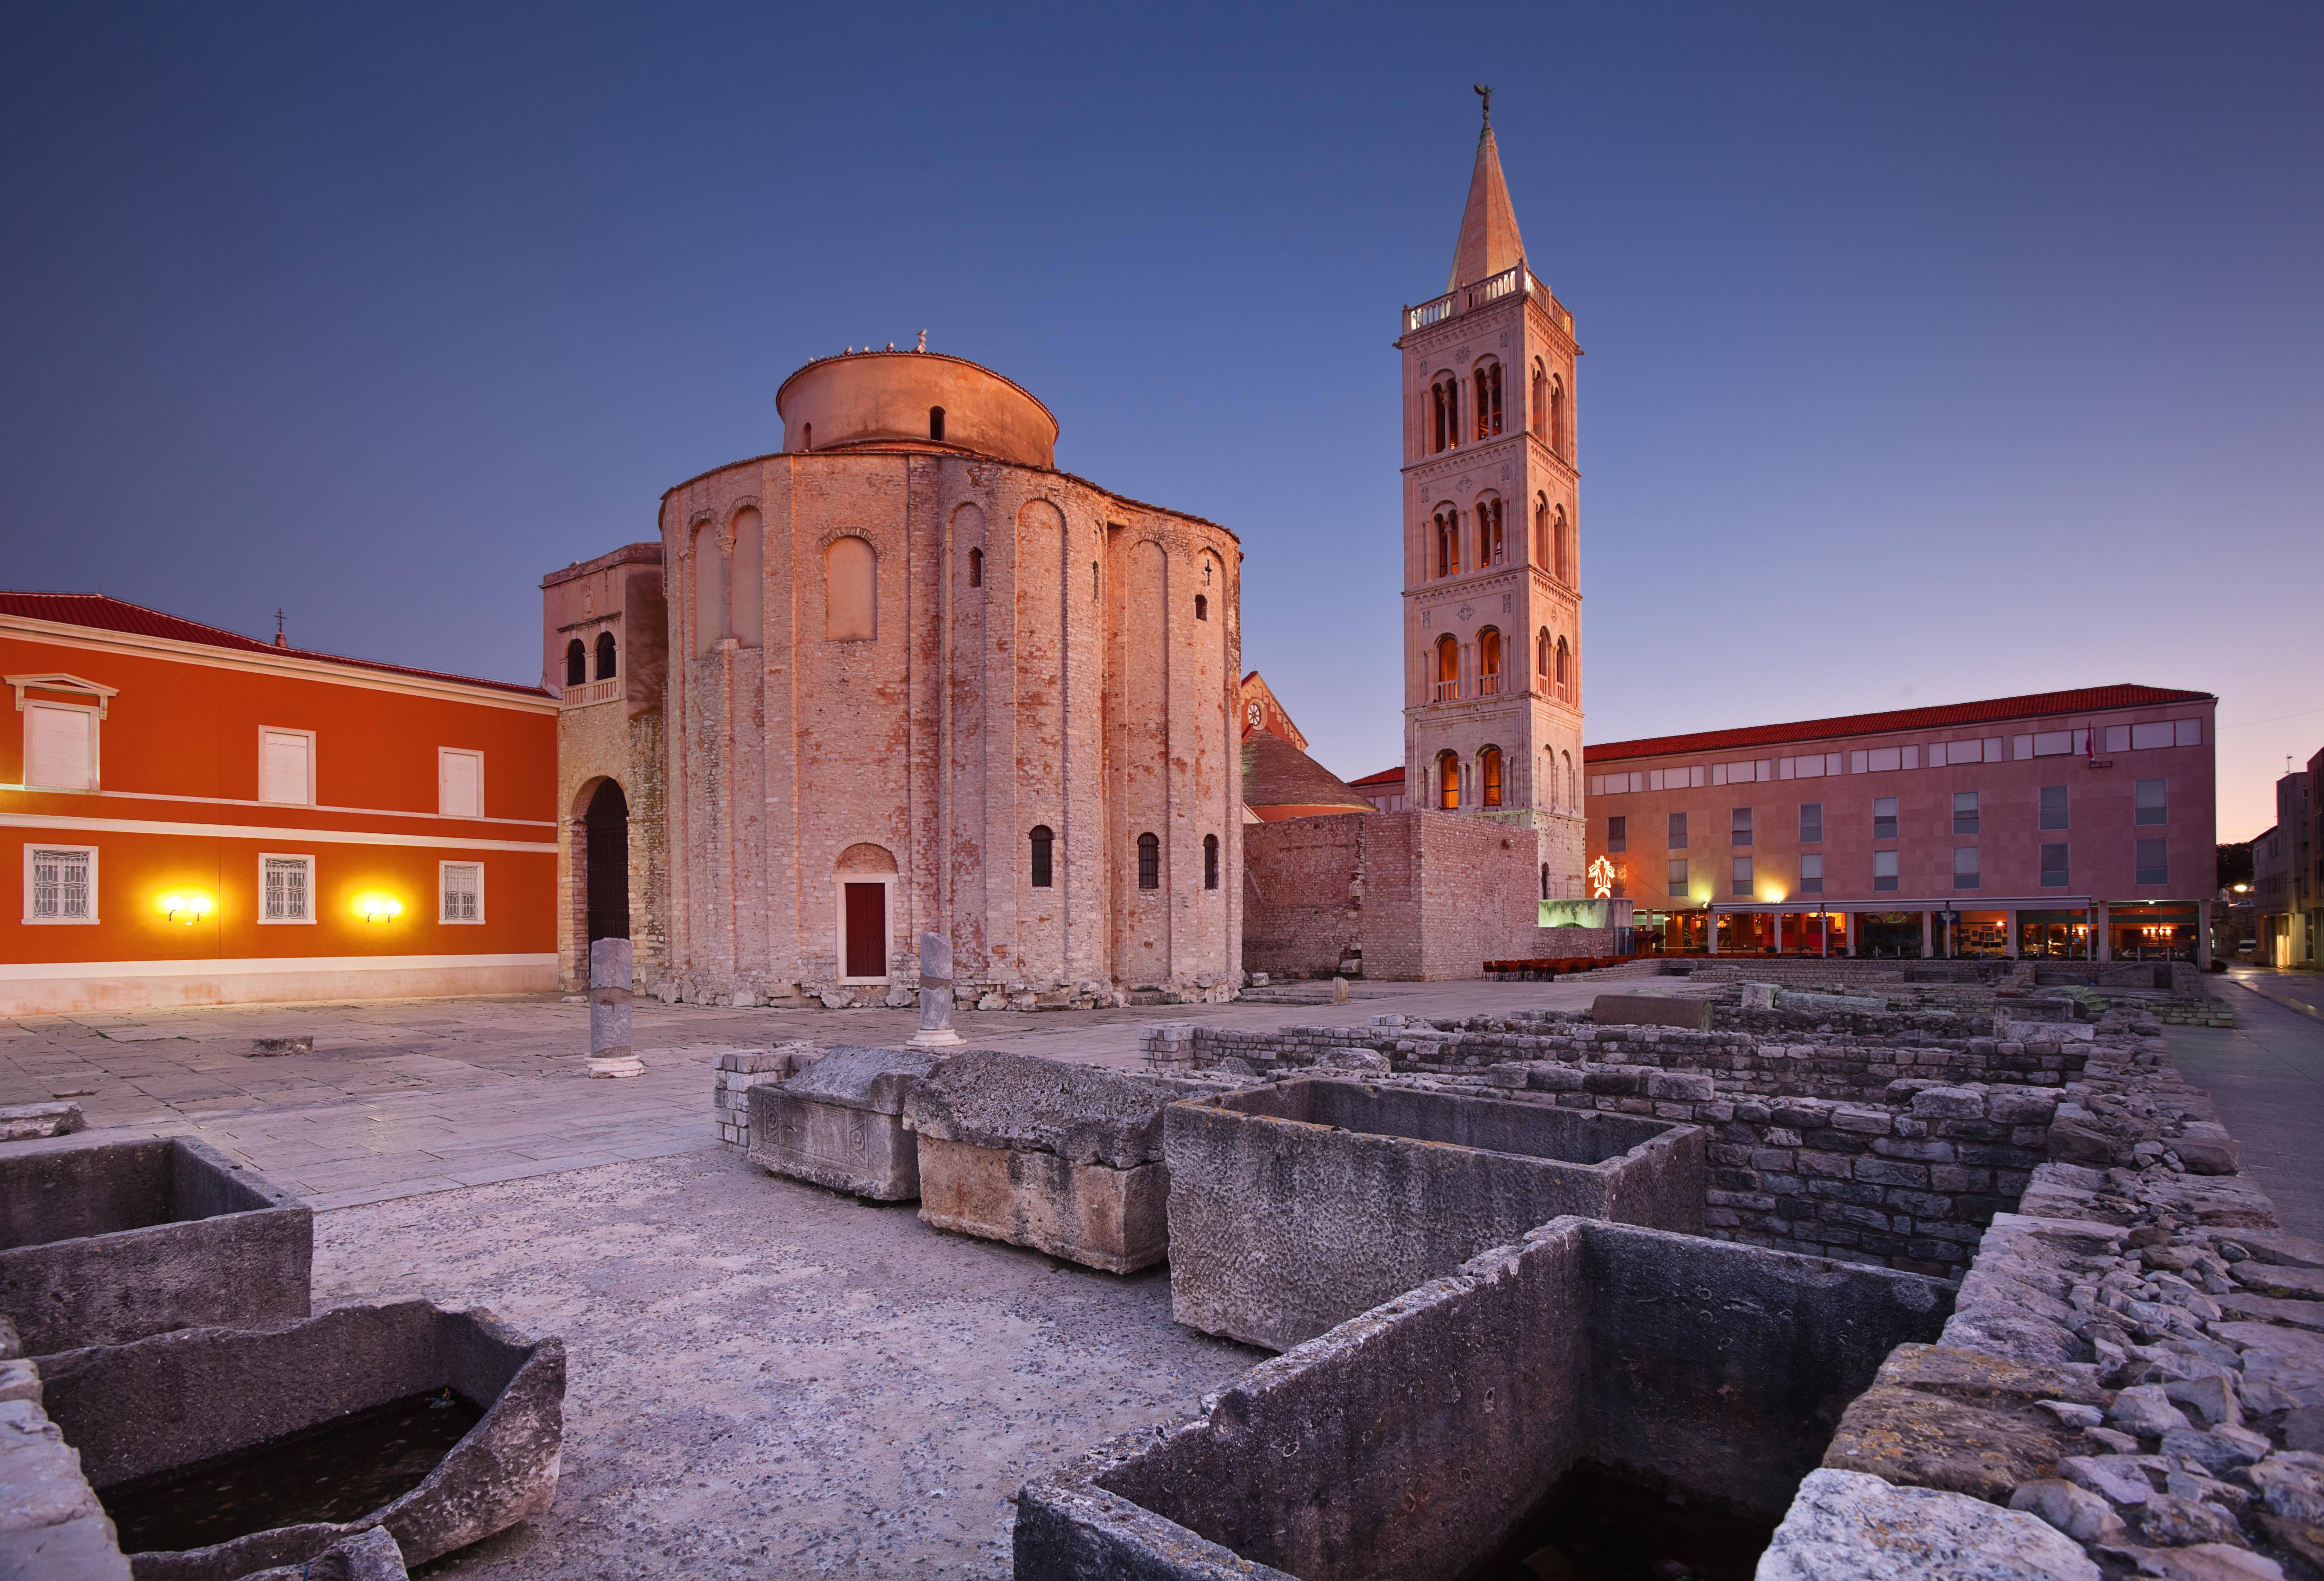 Image of the Church of St. Donat in Zadar